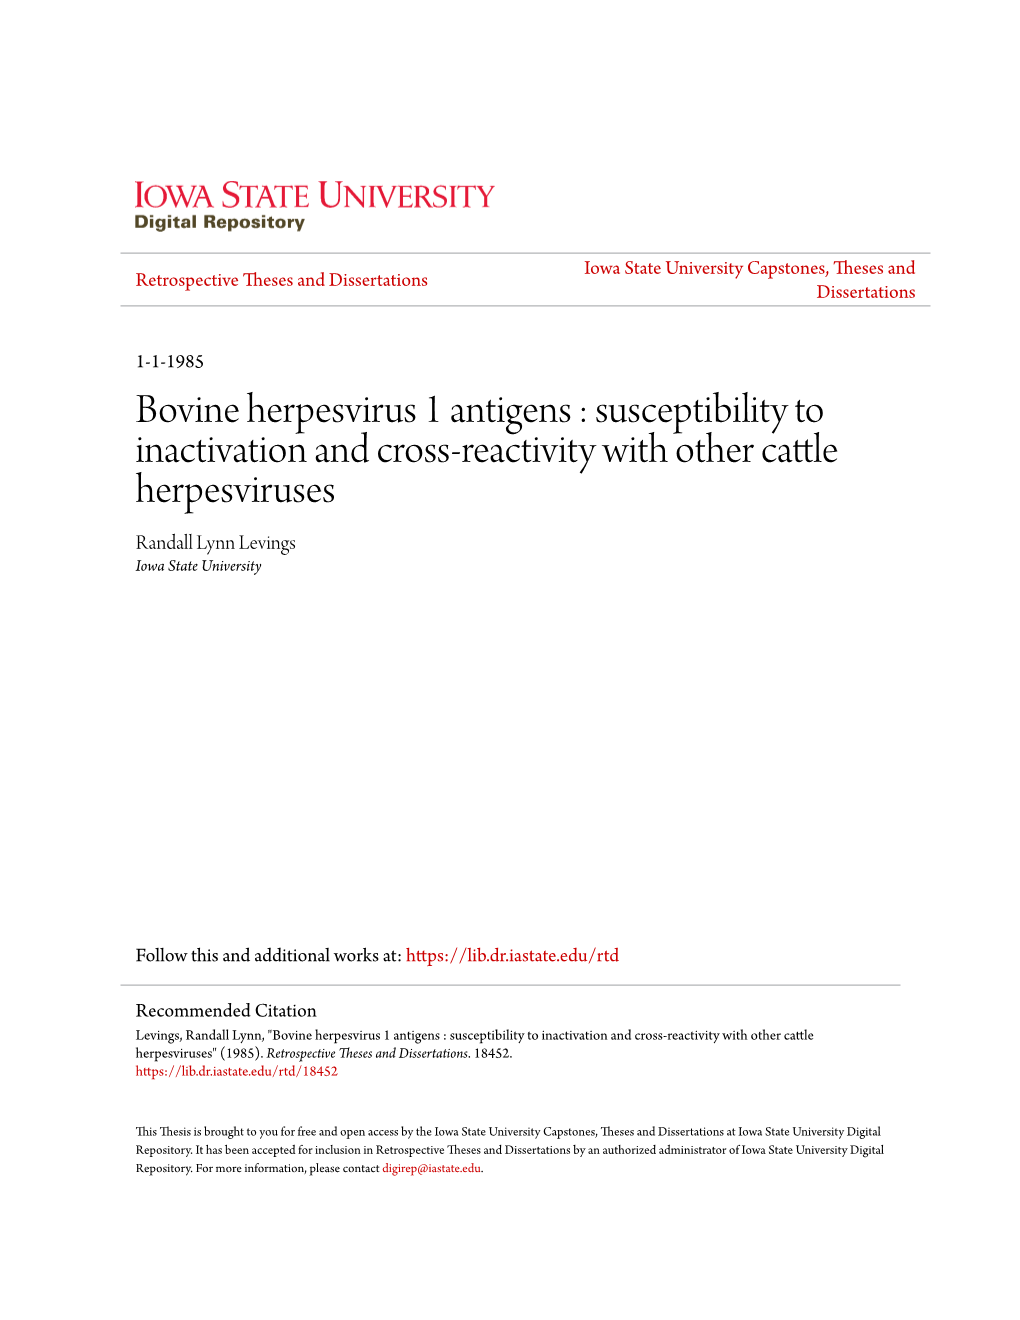 Bovine Herpesvirus 1 Antigens : Susceptibility to Inactivation and Cross-Reactivity with Other Cattle Herpesviruses Randall Lynn Levings Iowa State University